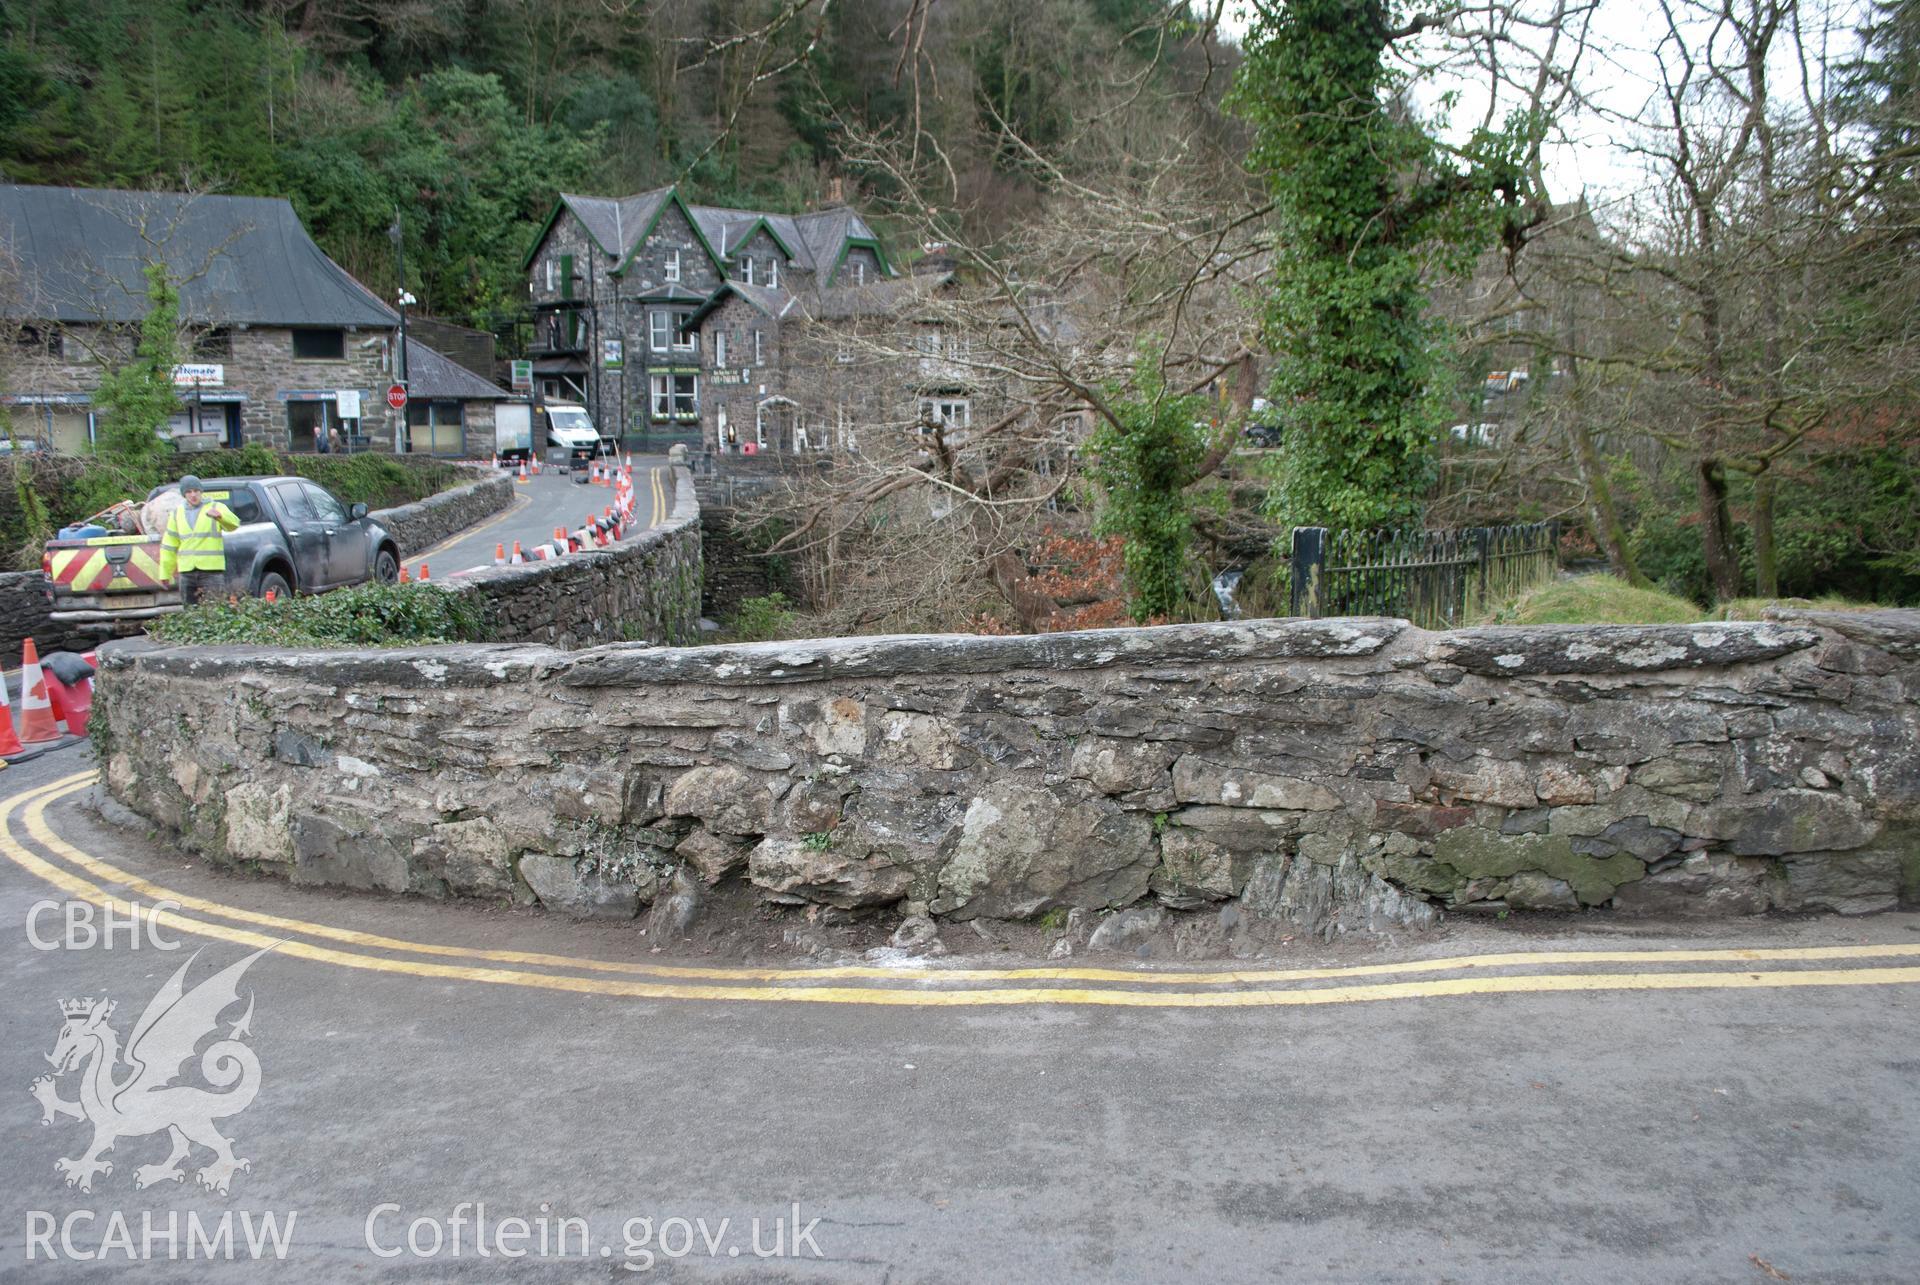 View of the carriageway side of the northwest parapet repair work. View from the north west. Digital photograph taken for Archaeological Watching Brief at Pont y Pair, Betws y Coed, 2019. Gwynedd Archaeological Trust Project no. G2587.